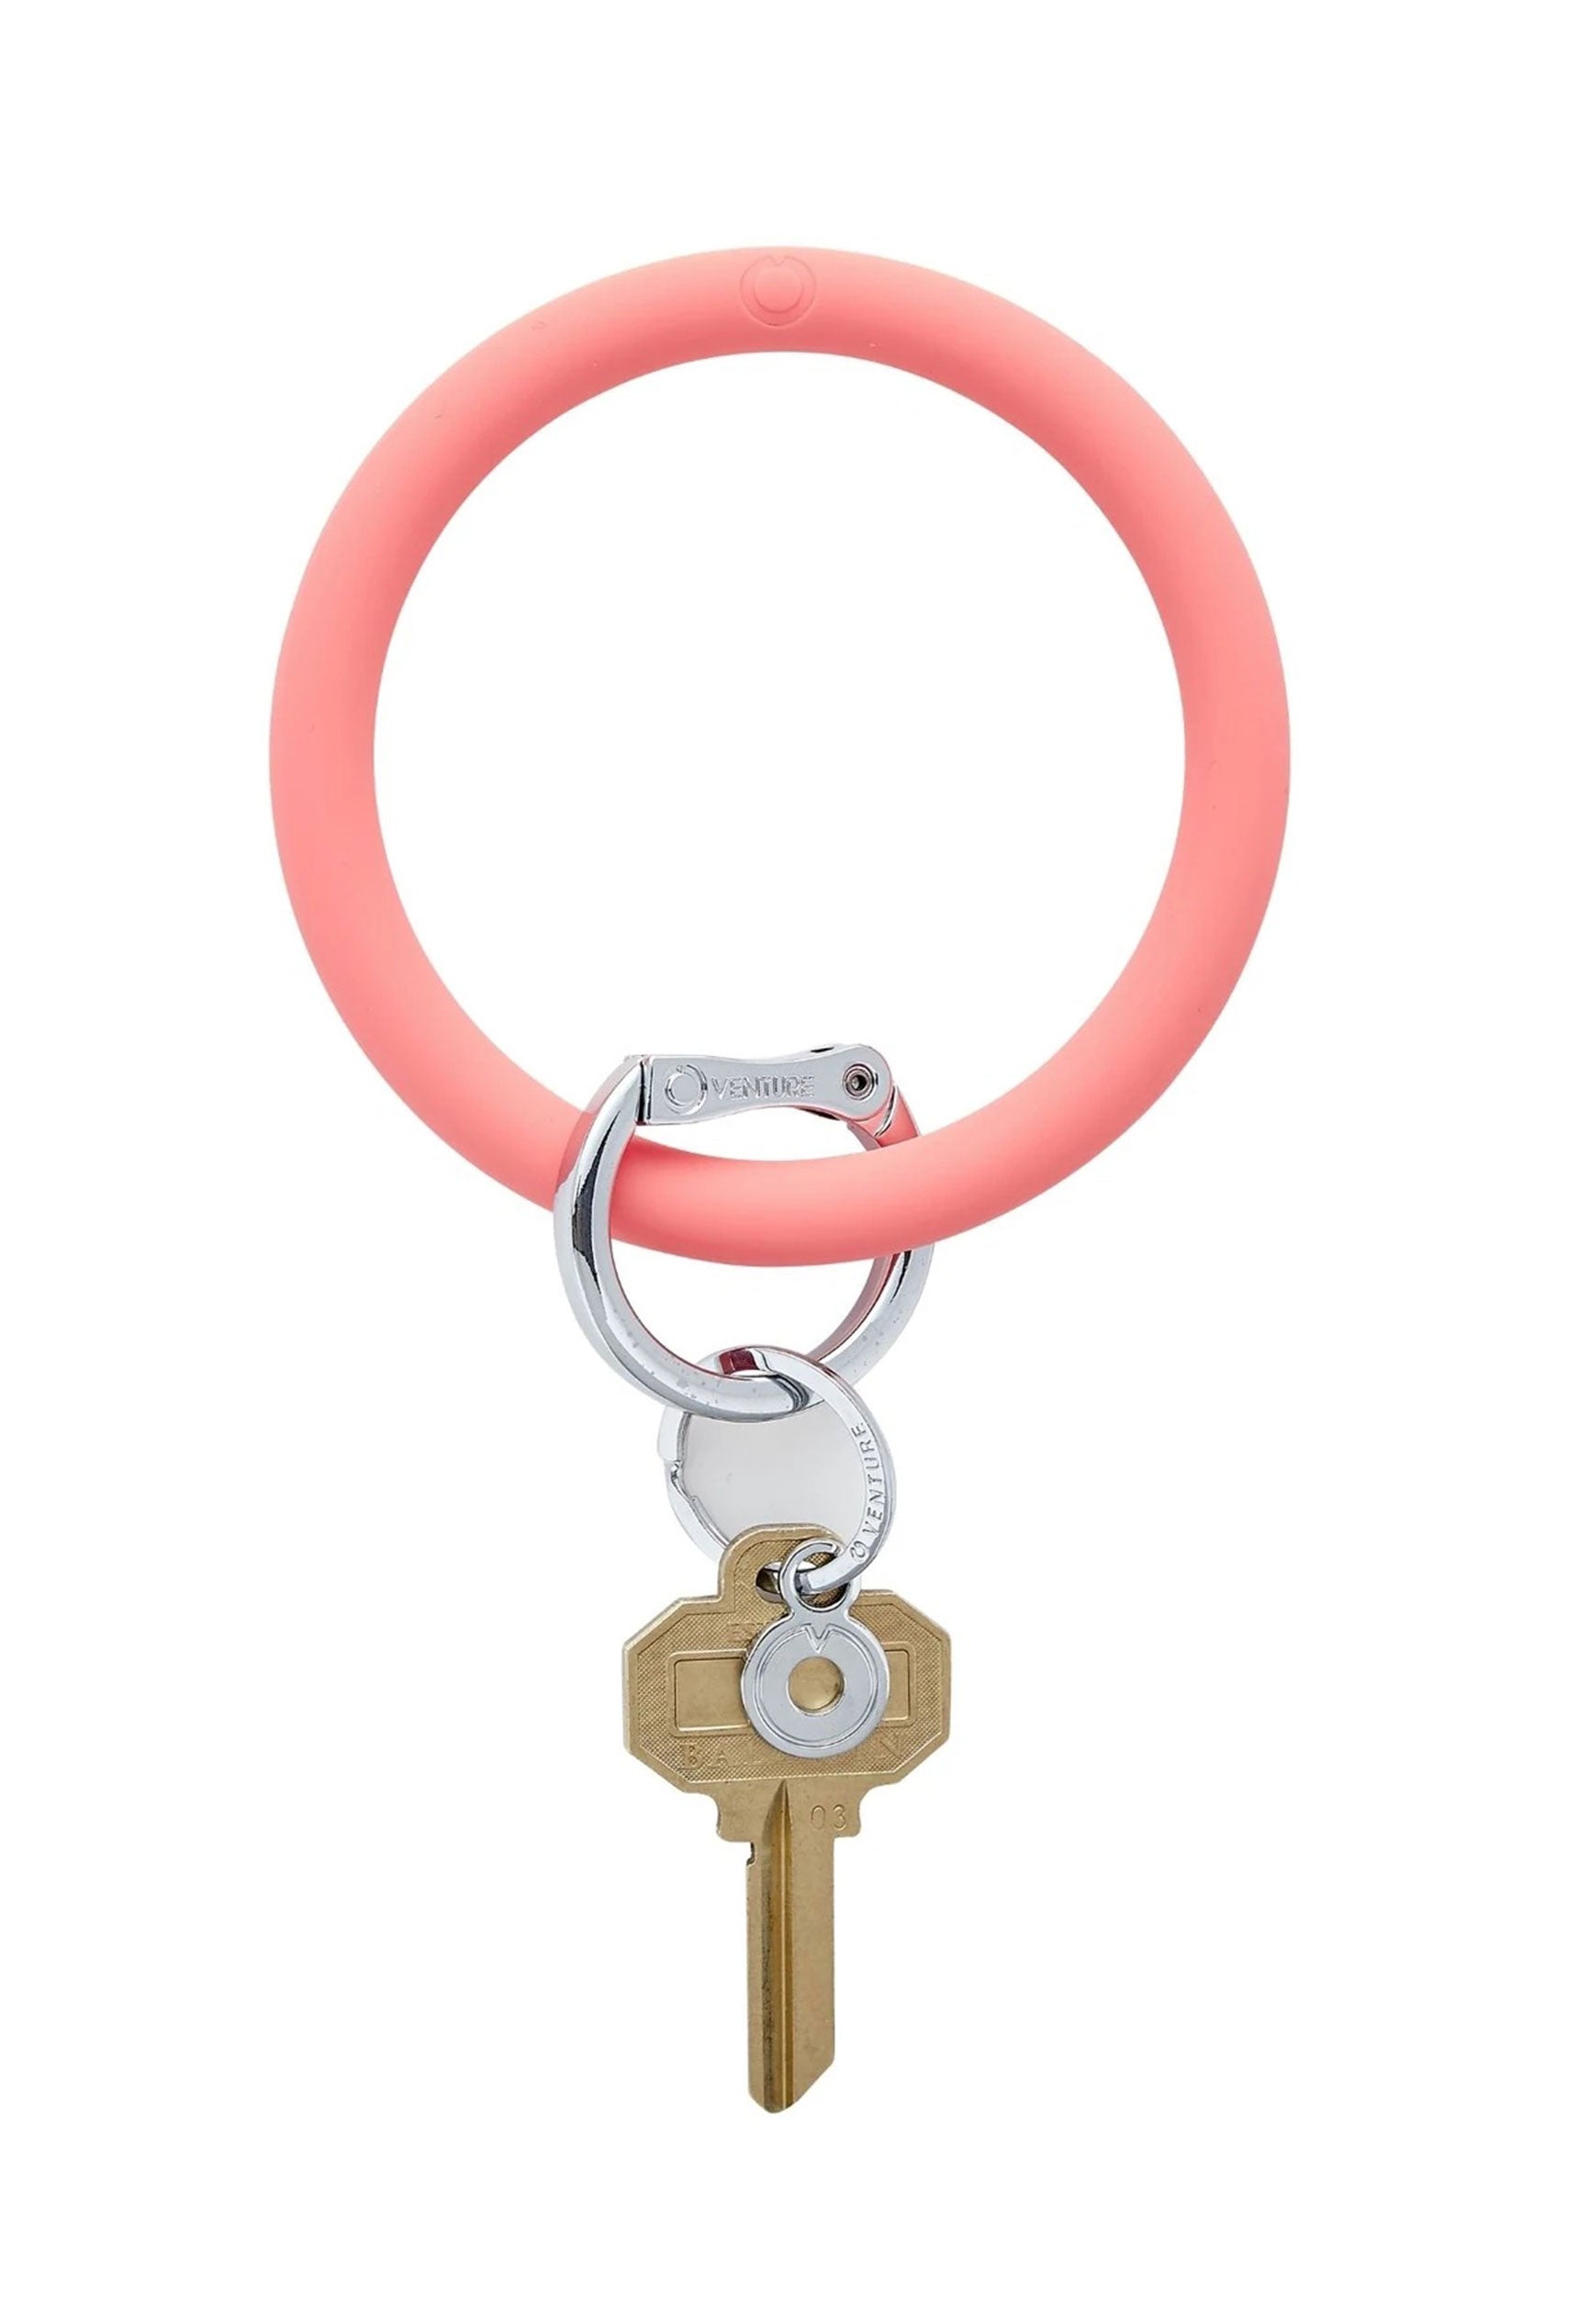 O-Venture Silicone Key Ring in Coral Reef, silicone key ring, coral color